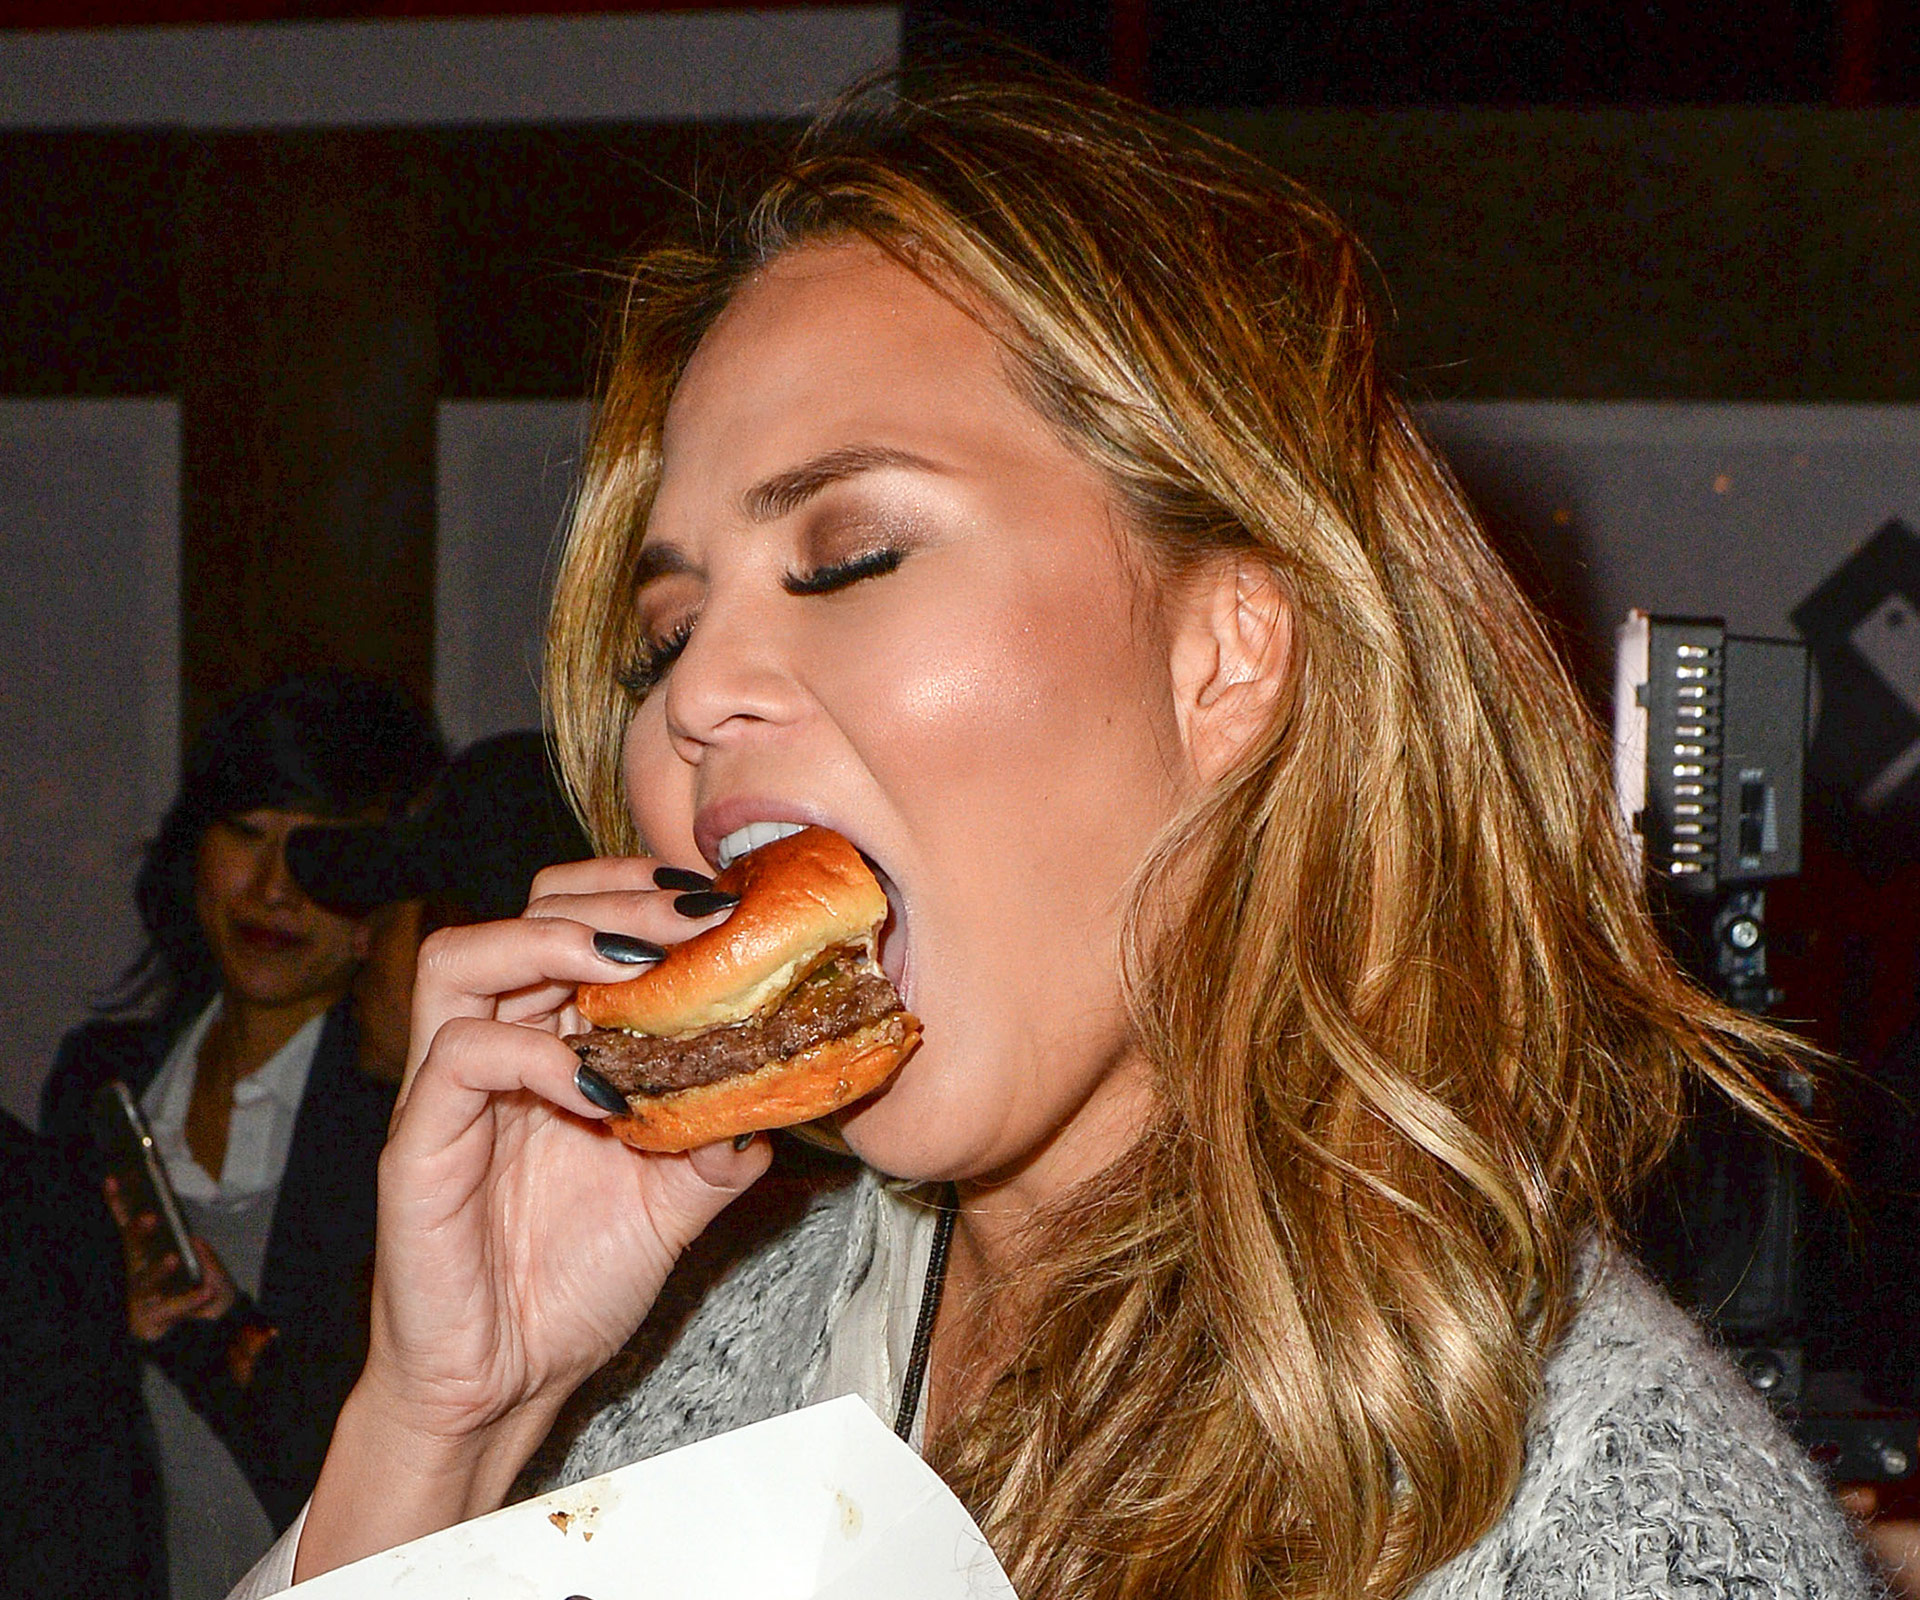 EXPLAINED: the reason we crave cheeseburgers after a big night